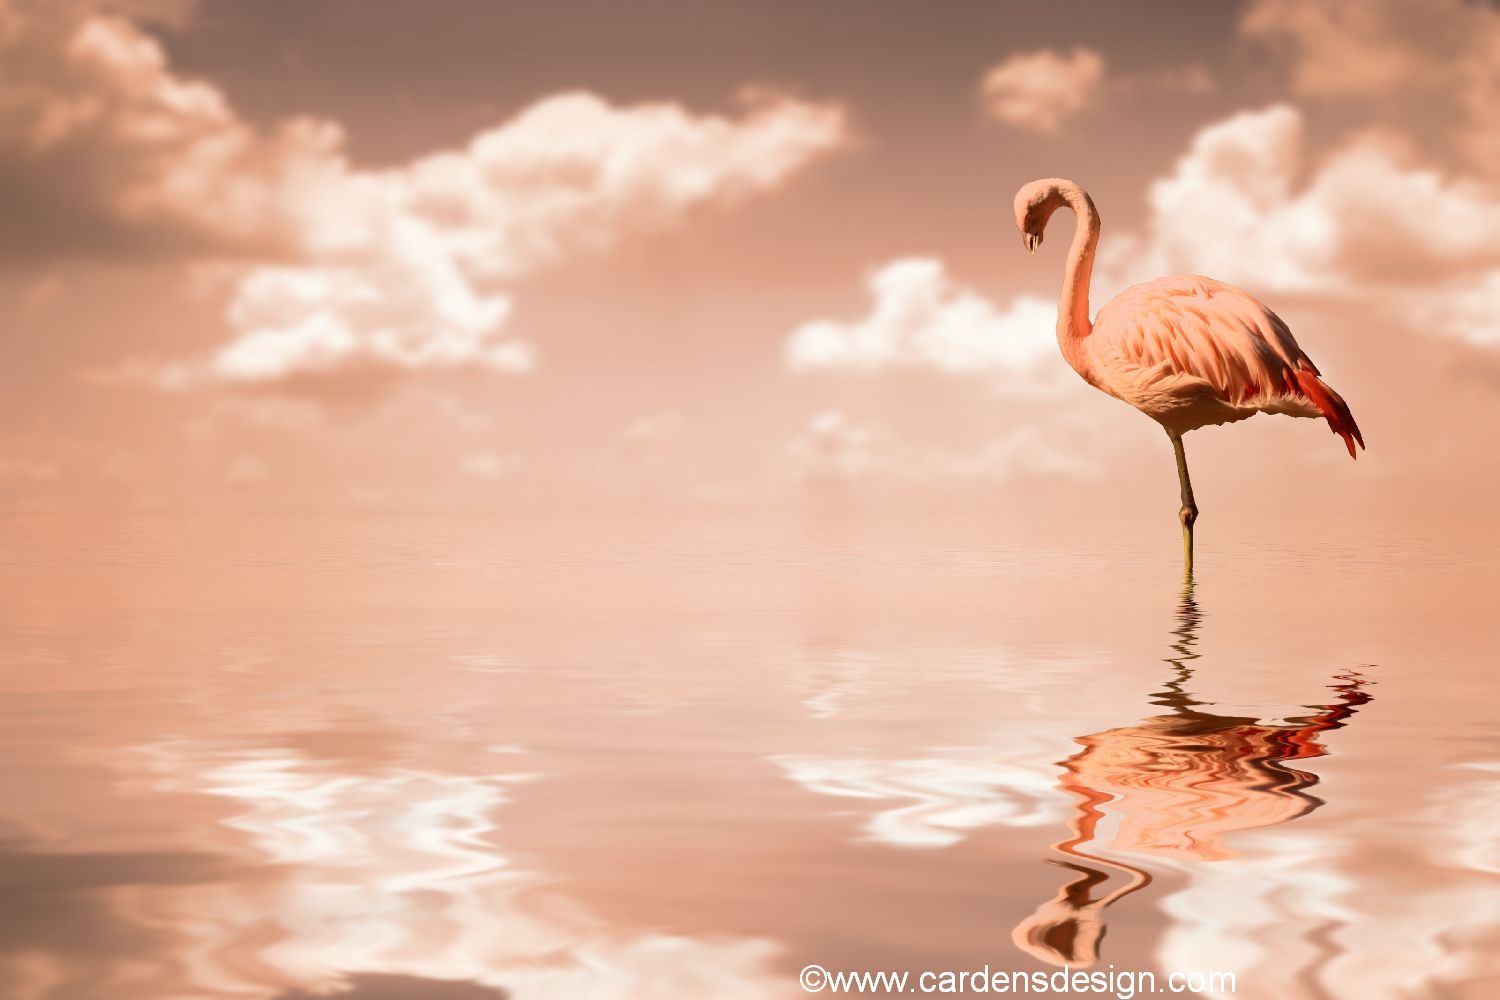 A flamingo standing in water with a sky background - Flamingo